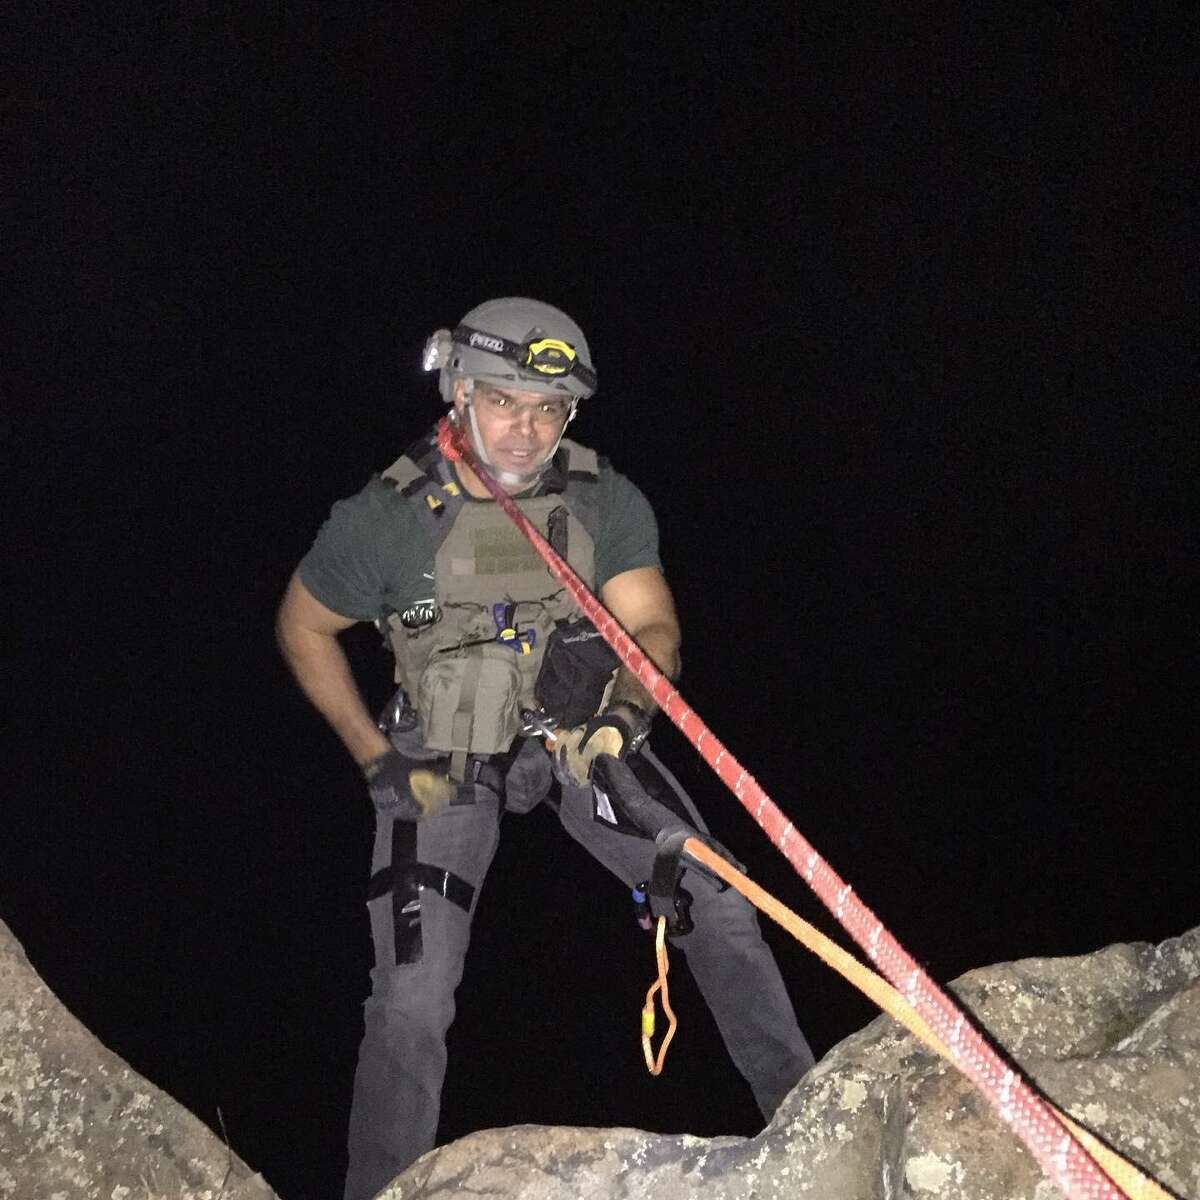 A member of the State Police Bomb Squad rappels 40 feet down a cliff at Sleeping Giant State Park in Hamden Saturday, Oct. 3, 2020, to investigate an item suspected to be a bomb. It was actually an item left to be found be people geocaching in the park.